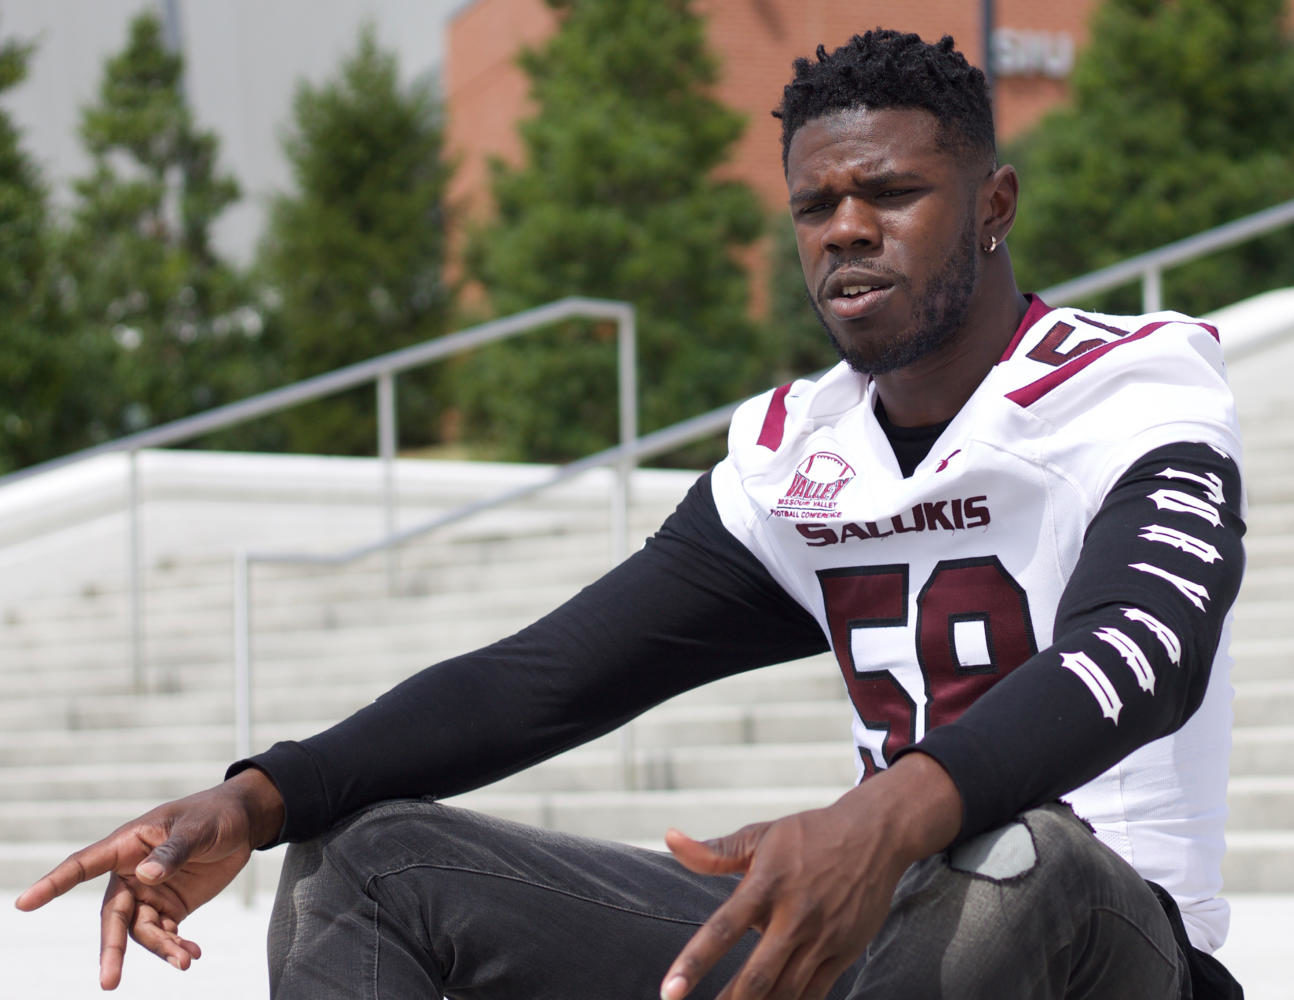 Defensive lineman Raymond Sullivan, 19, of Houston Texas, talks about the damage he saw from Hurricane Harvey Monday Sept. 11, 2017, outside SIU Arena. “On a scale from one to ten, it was an eleven,” Sullivan said. (Mary Newman | @MaryNewmanDE) 